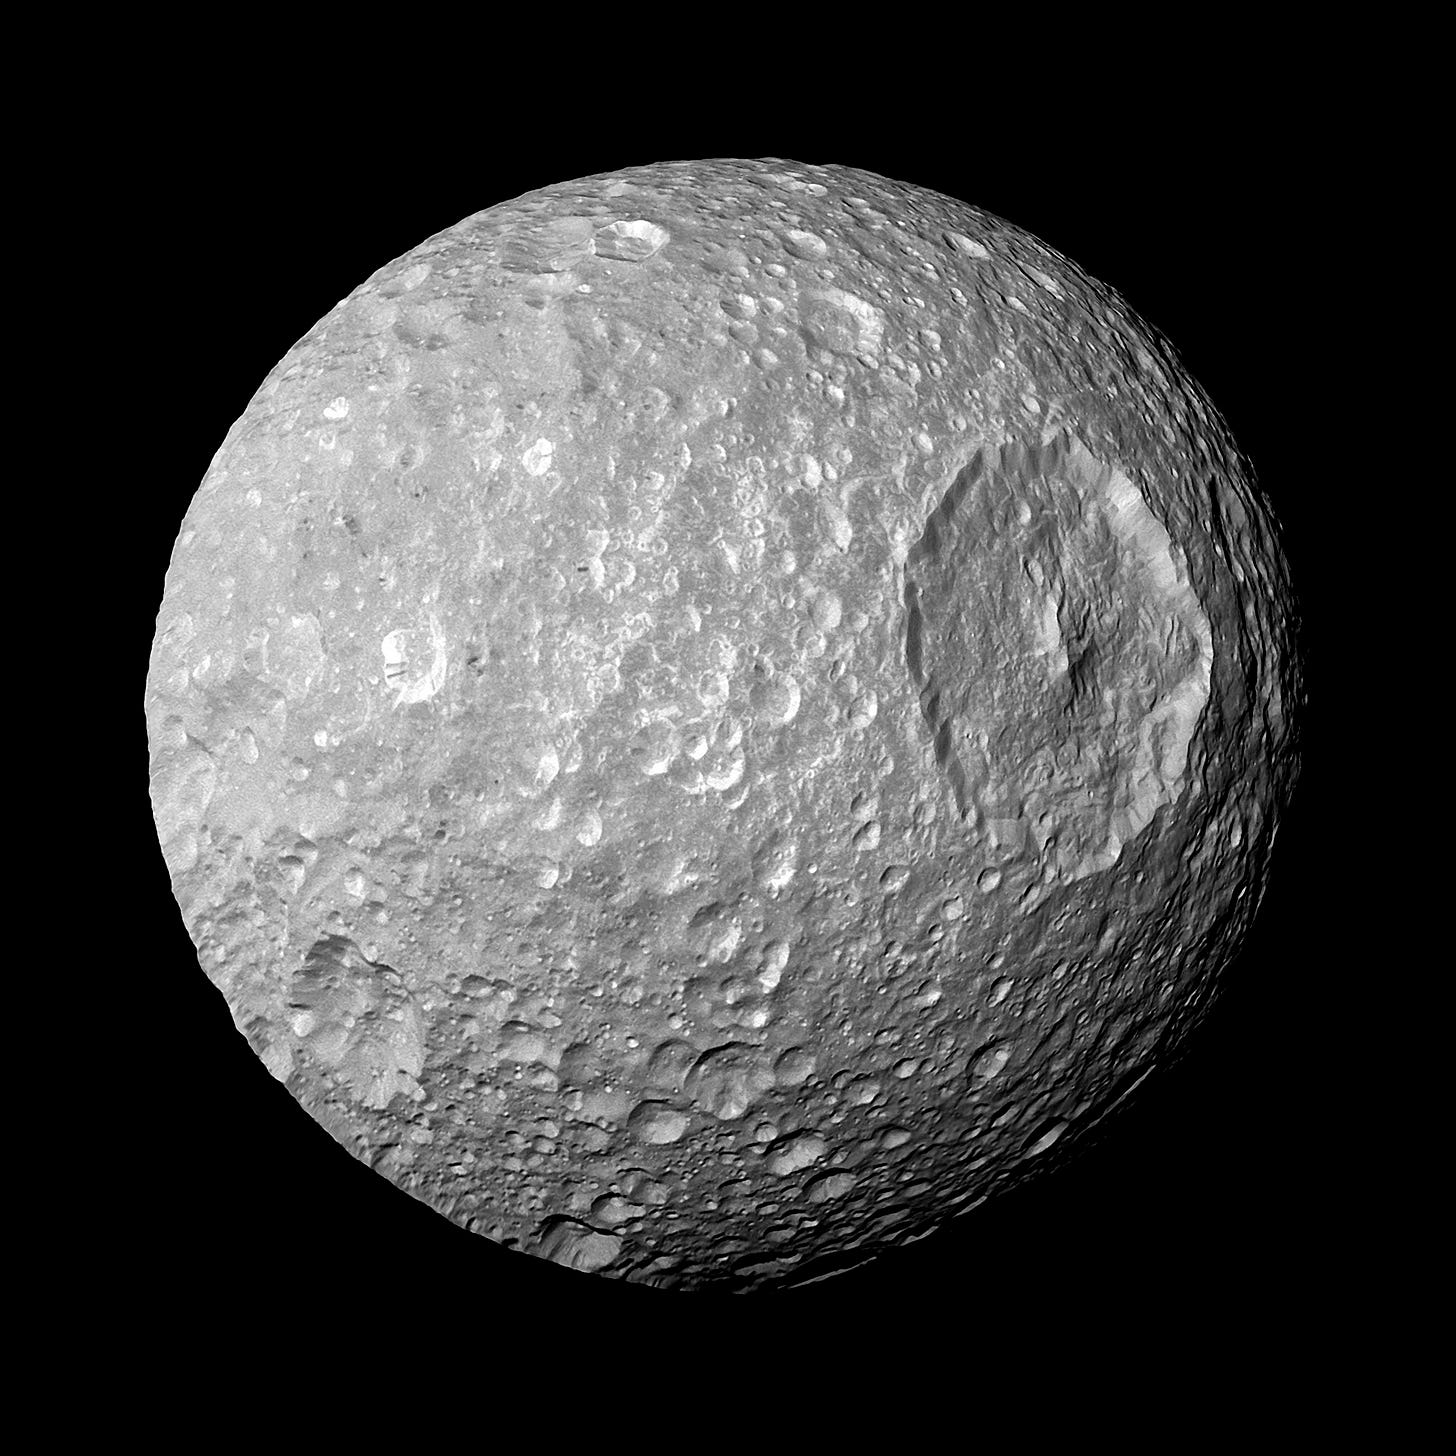 Photo of Saturn's moon Mimas in space and it's large Herschel Crater.